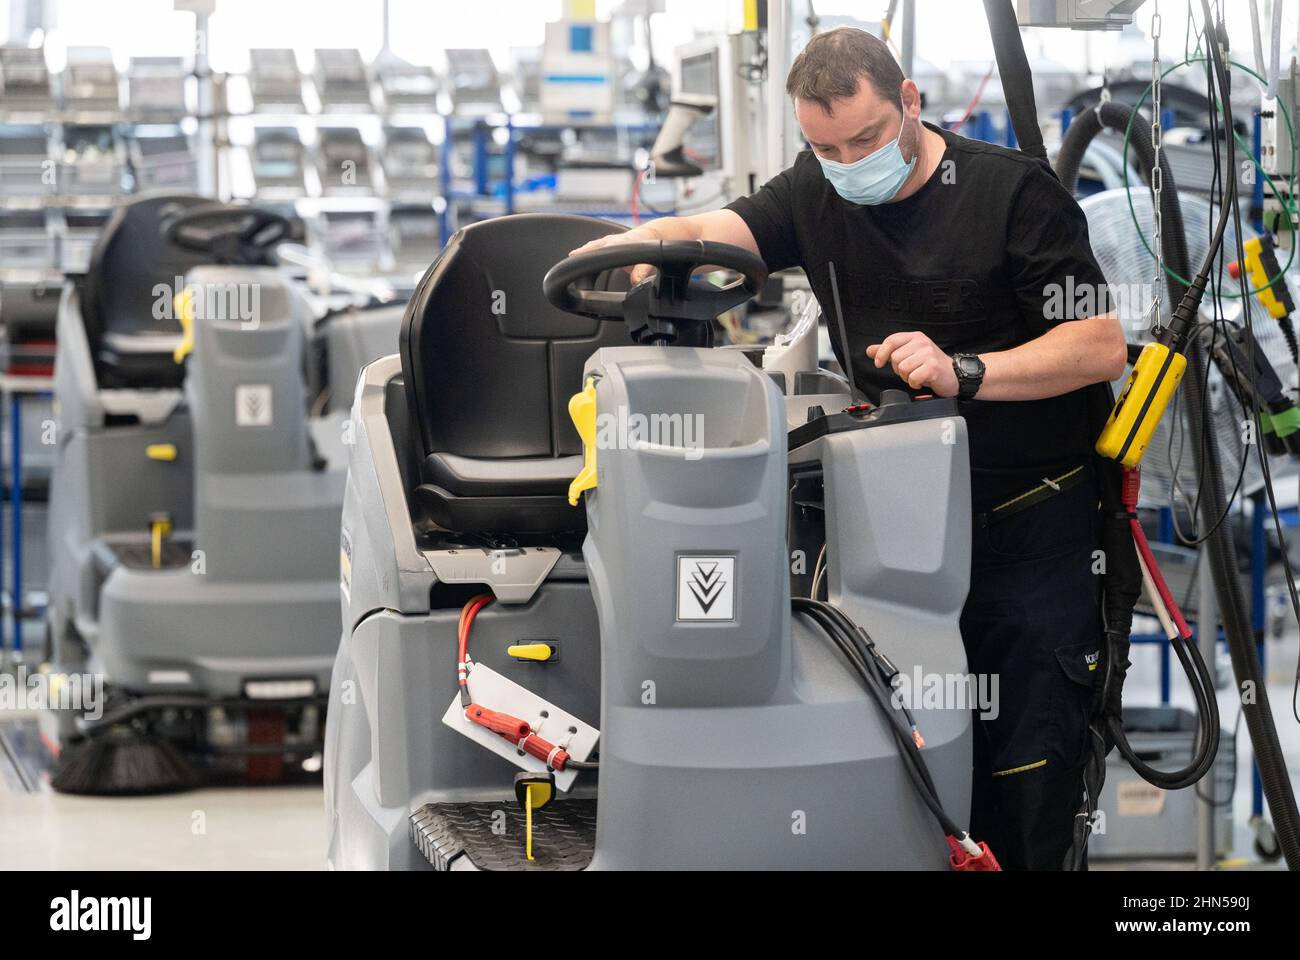 Winnenden, Germany. 14th Feb, 2022. An employee of the cleaning equipment  manufacturer Kärcher assembles a scrubber-dryer in production. Alfred  Kärcher SE & Co. KG announces its business figures for 2021. Credit: Marijan